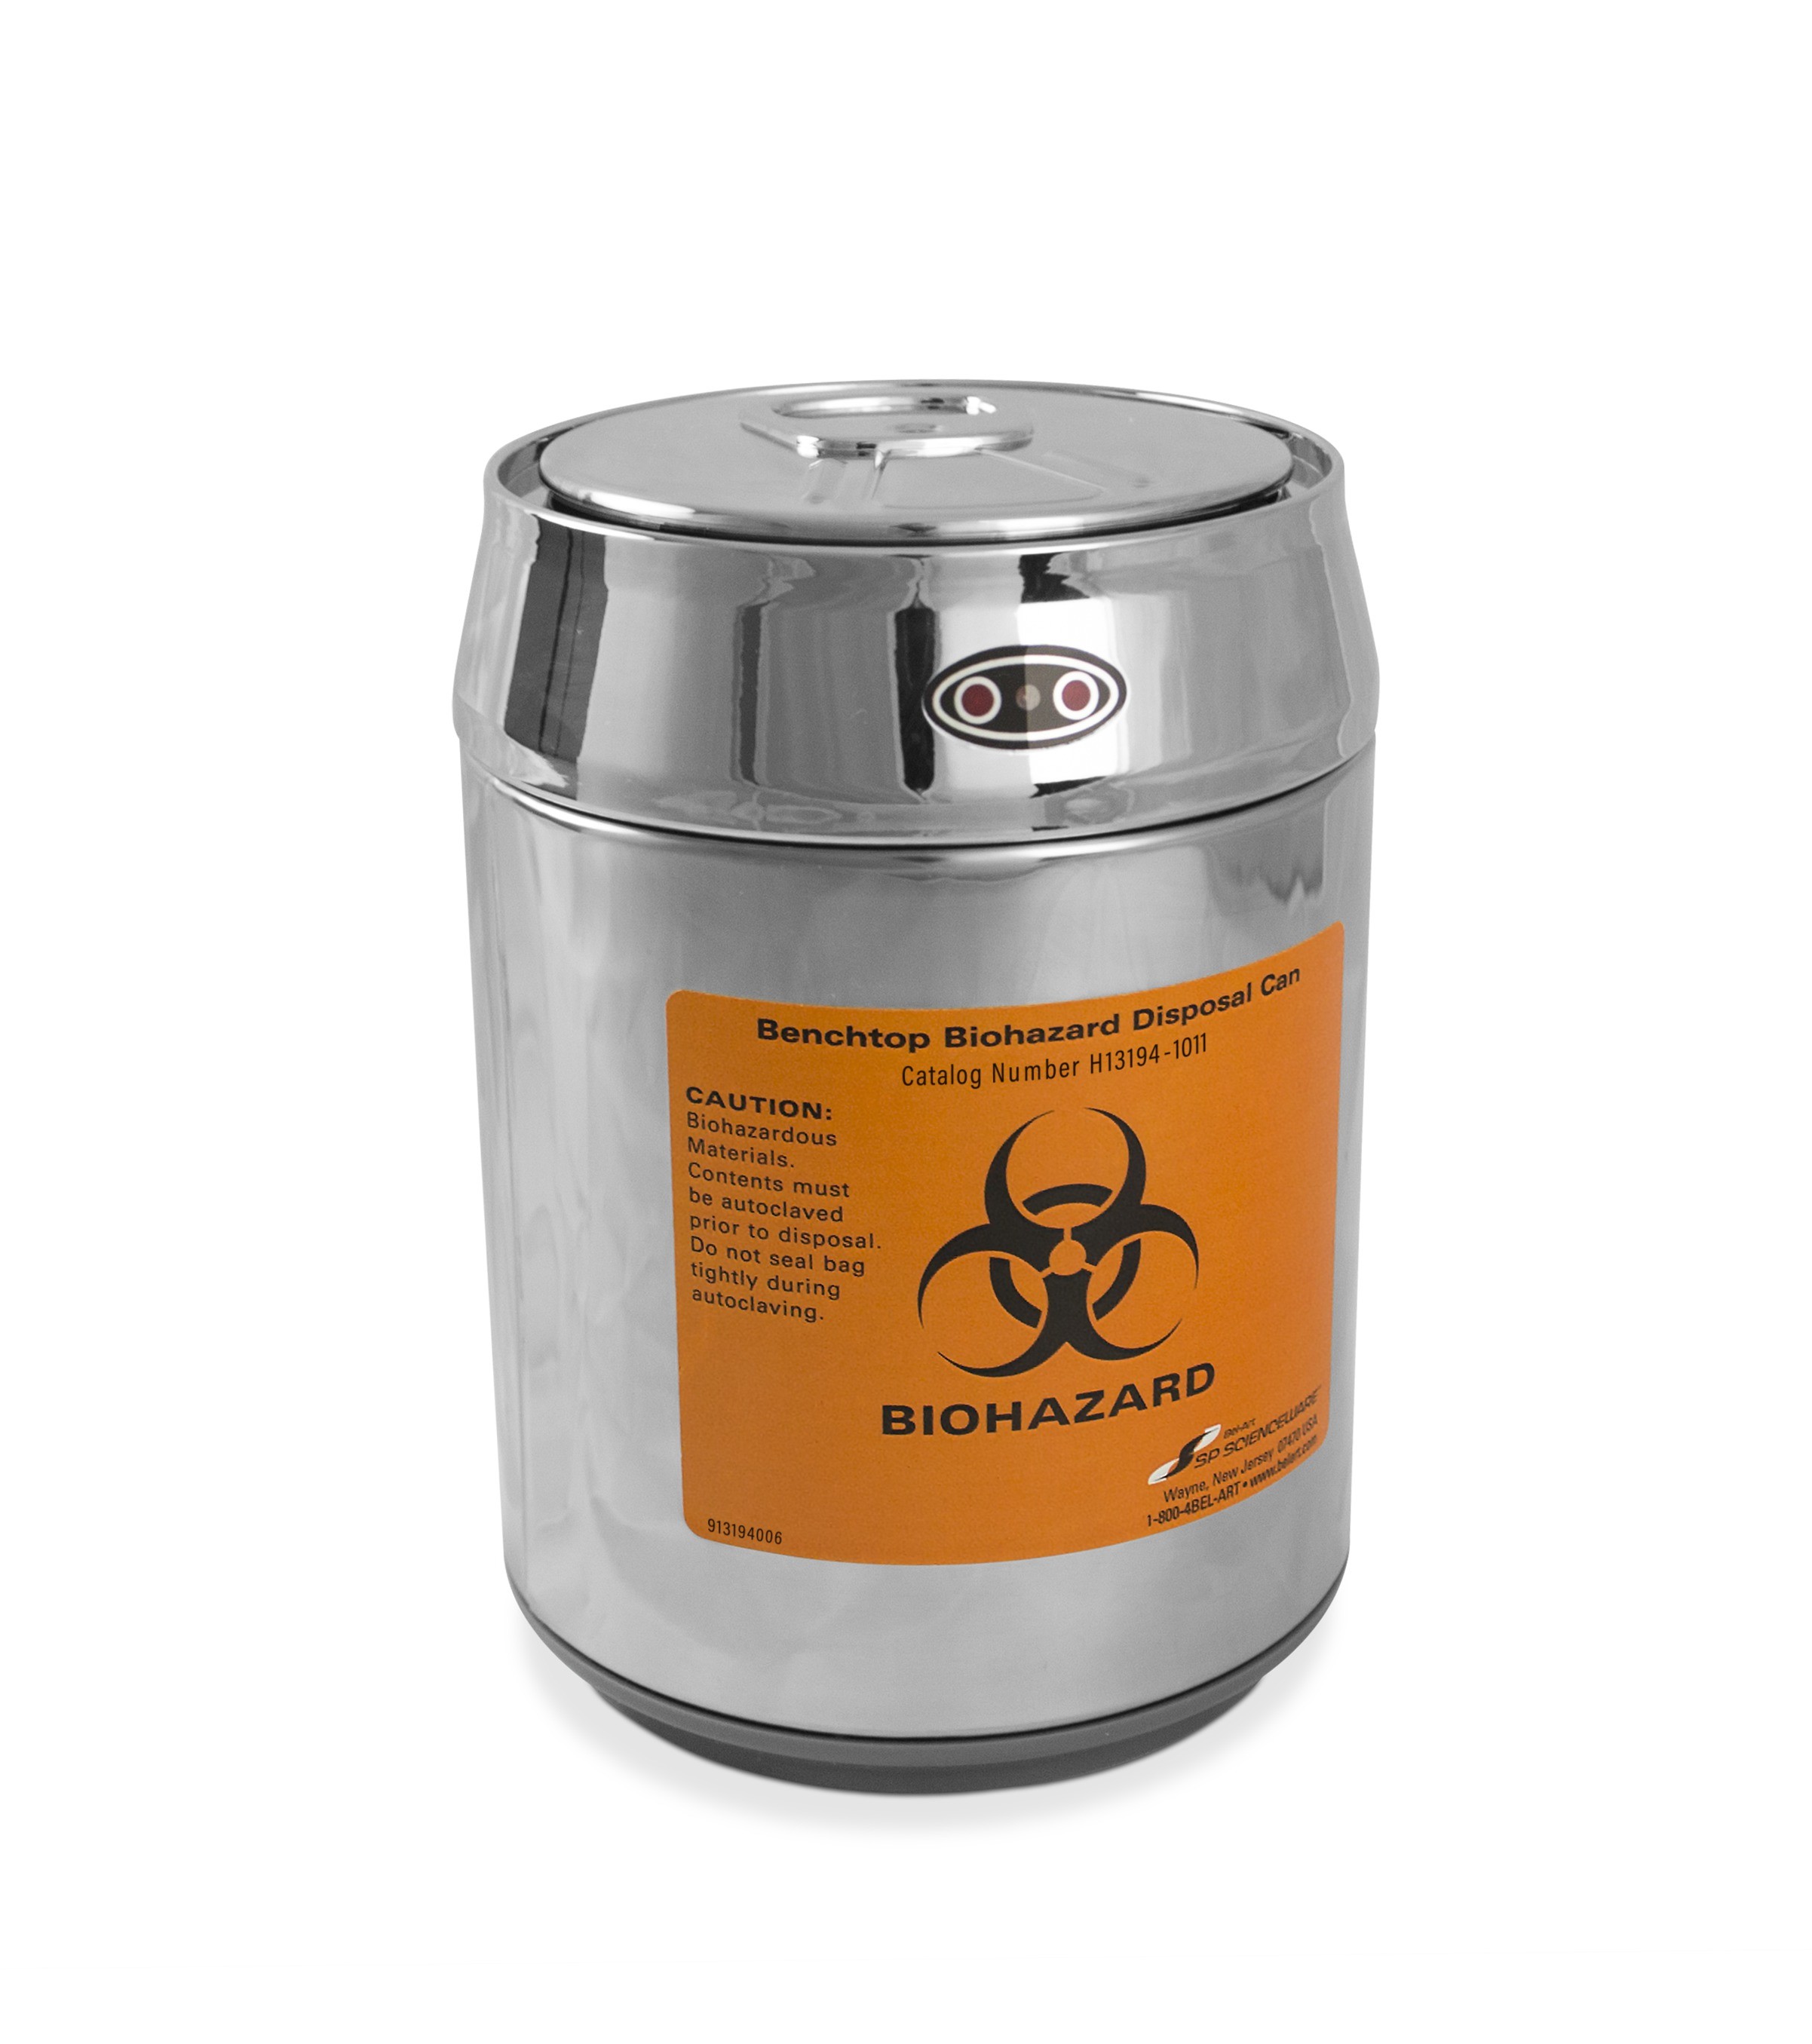 SP Bel-Art Benchtop Biohazard Disposal Can with Motion Sensor Lid; 1.5L Capacity, Stainless Steel